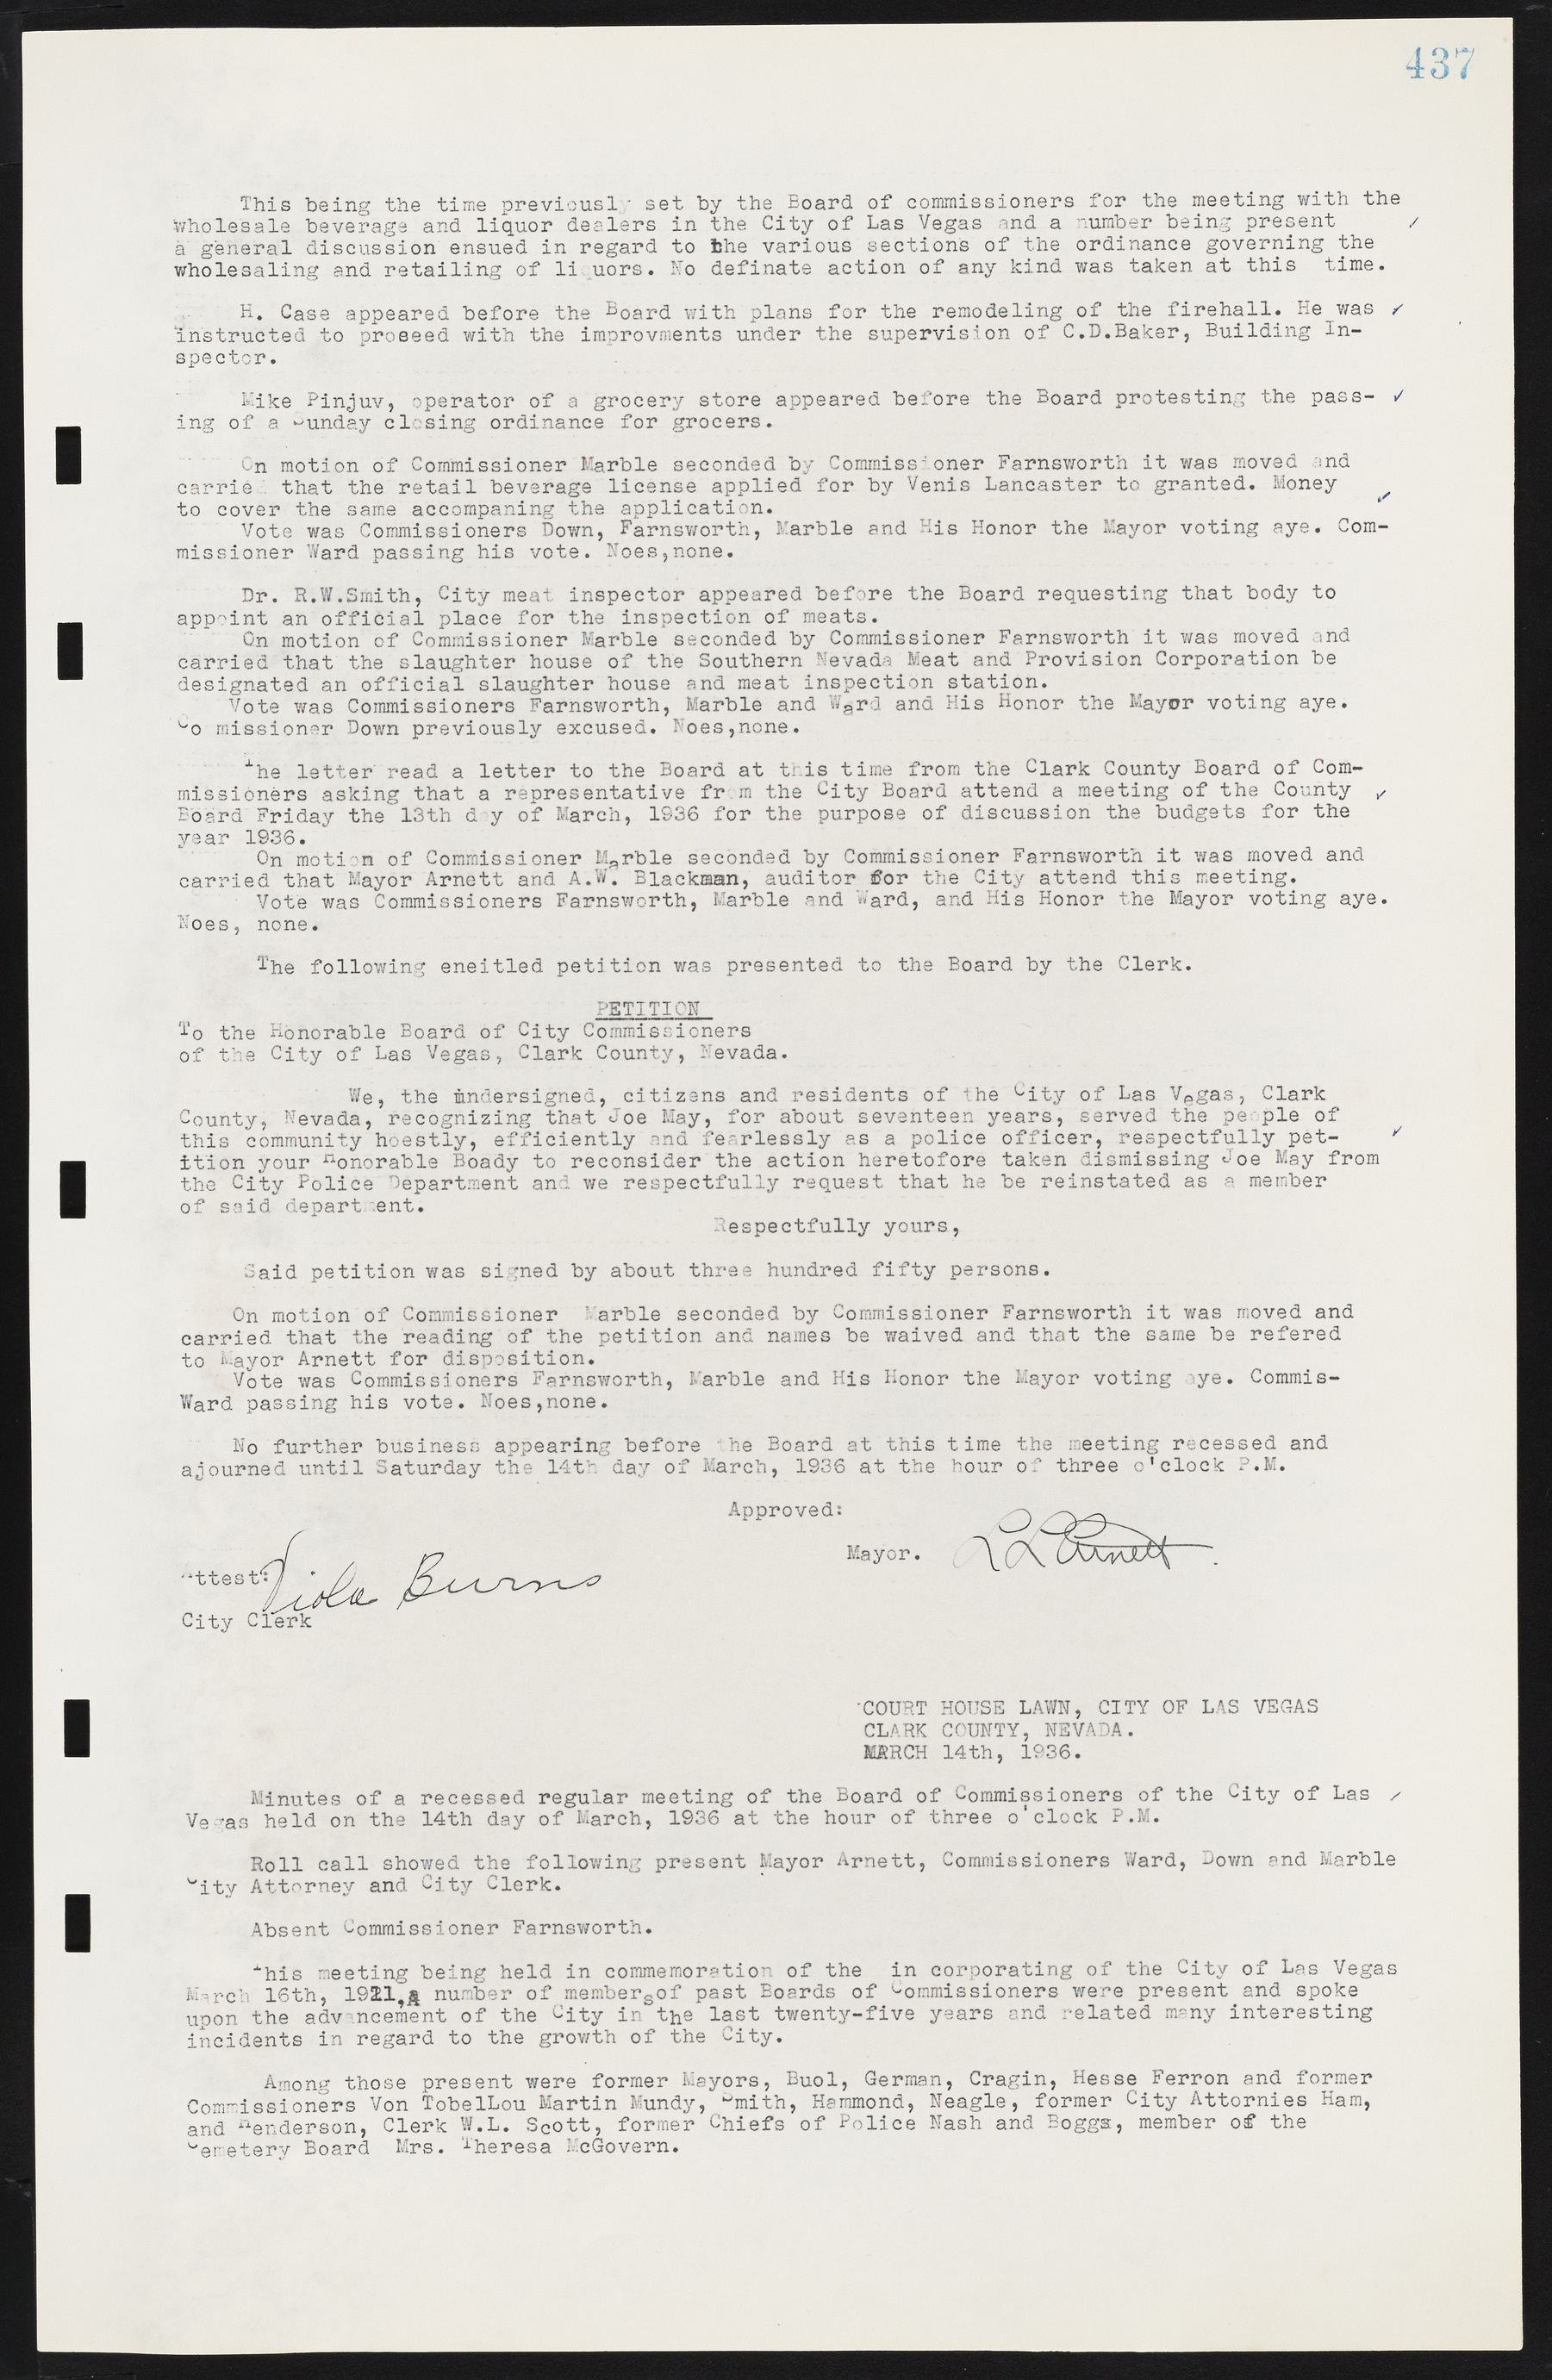 Las Vegas City Commission Minutes, May 14, 1929 to February 11, 1937, lvc000003-444